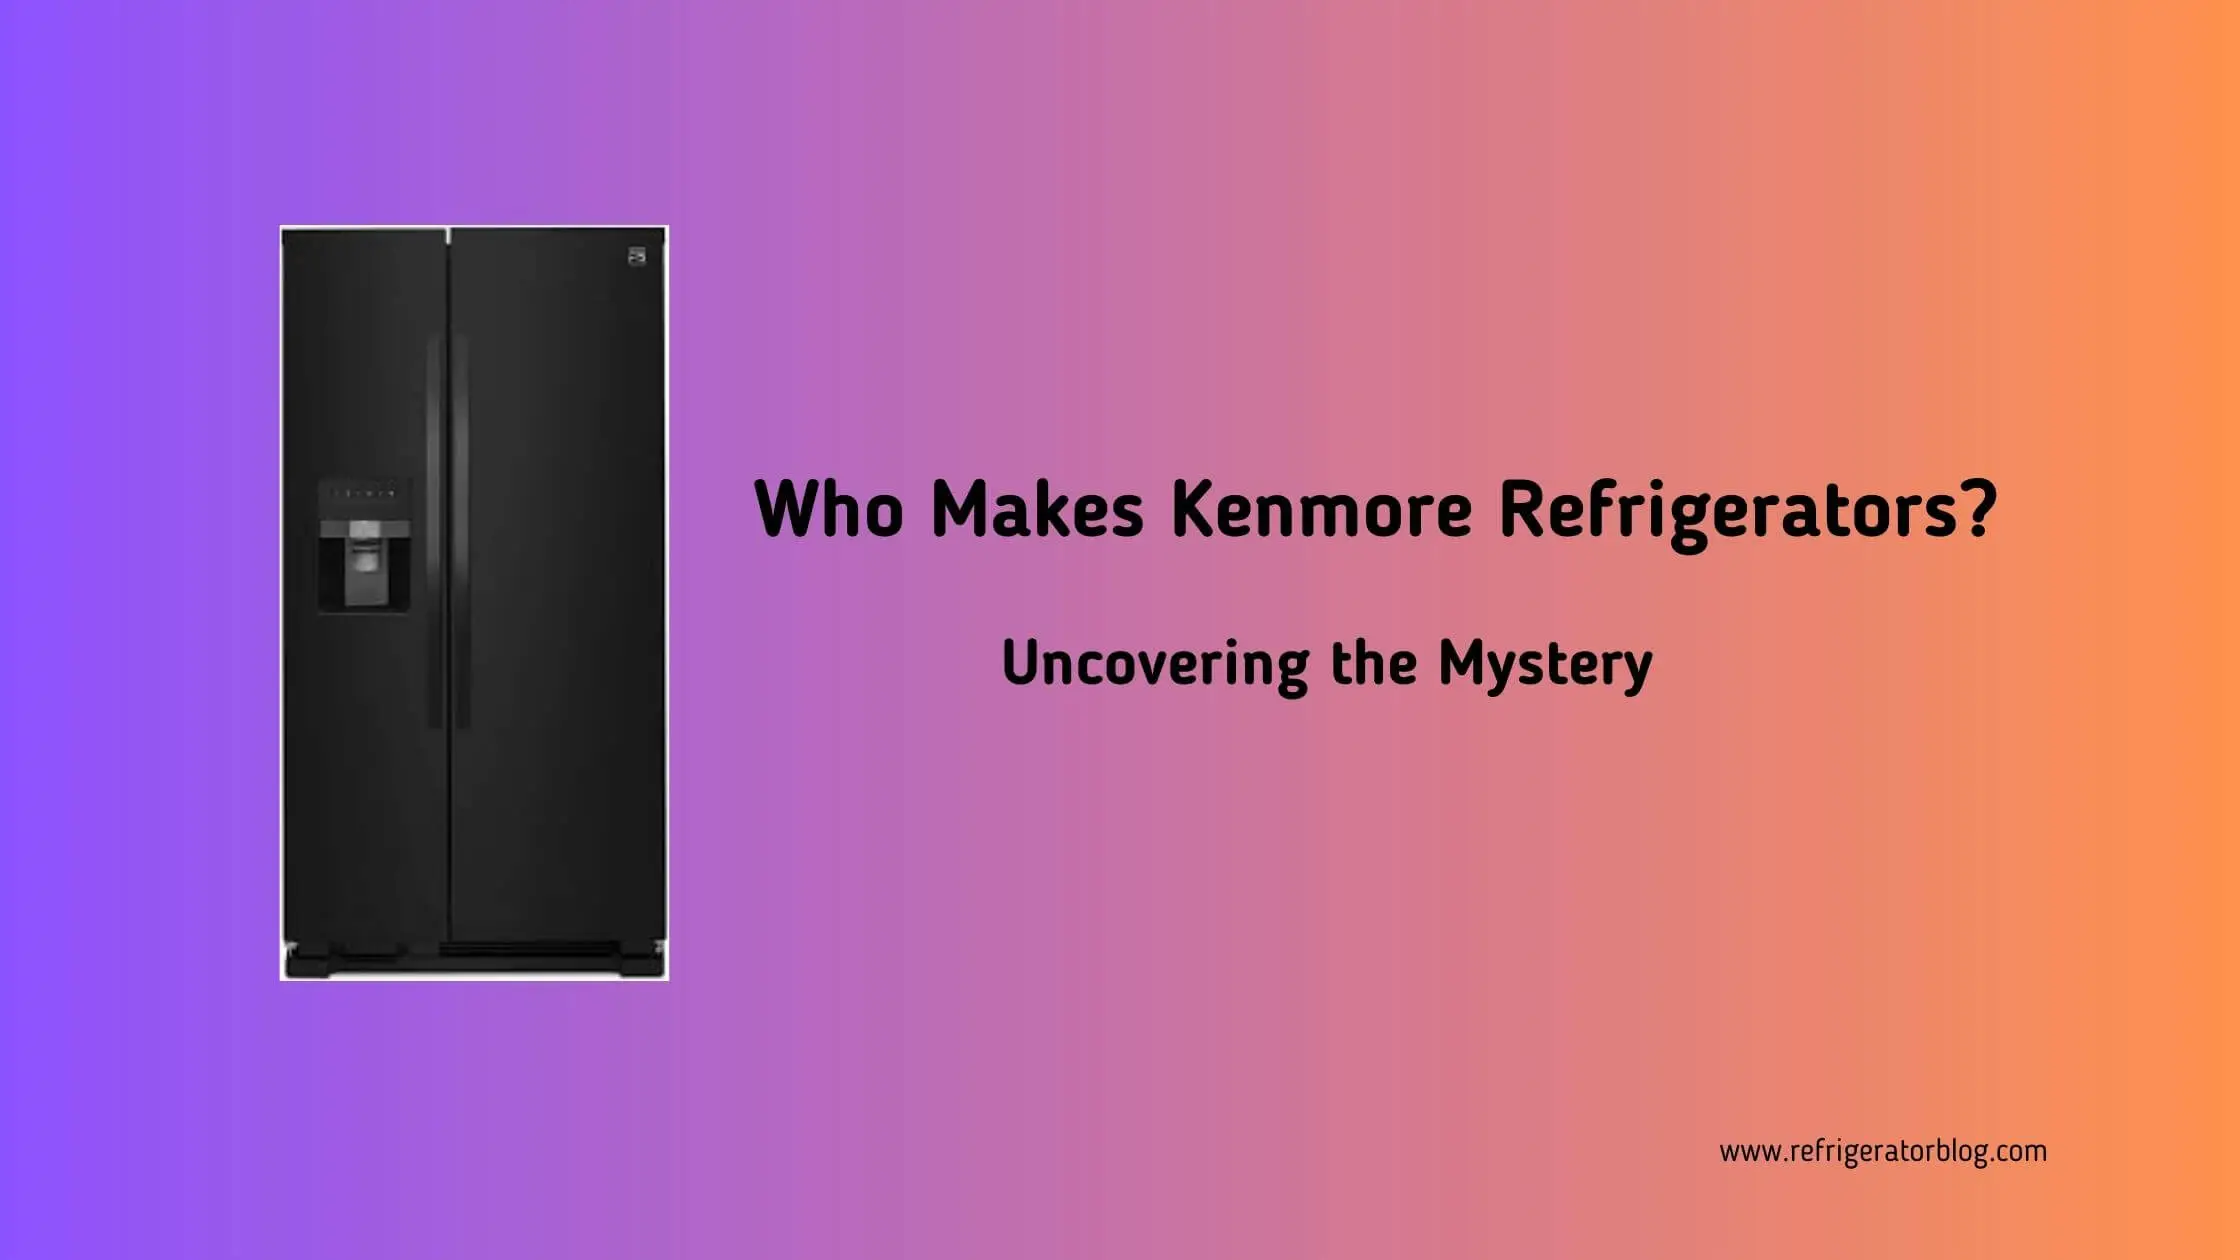 Who Makes Kenmore Refrigerators? Uncovering the Mystery